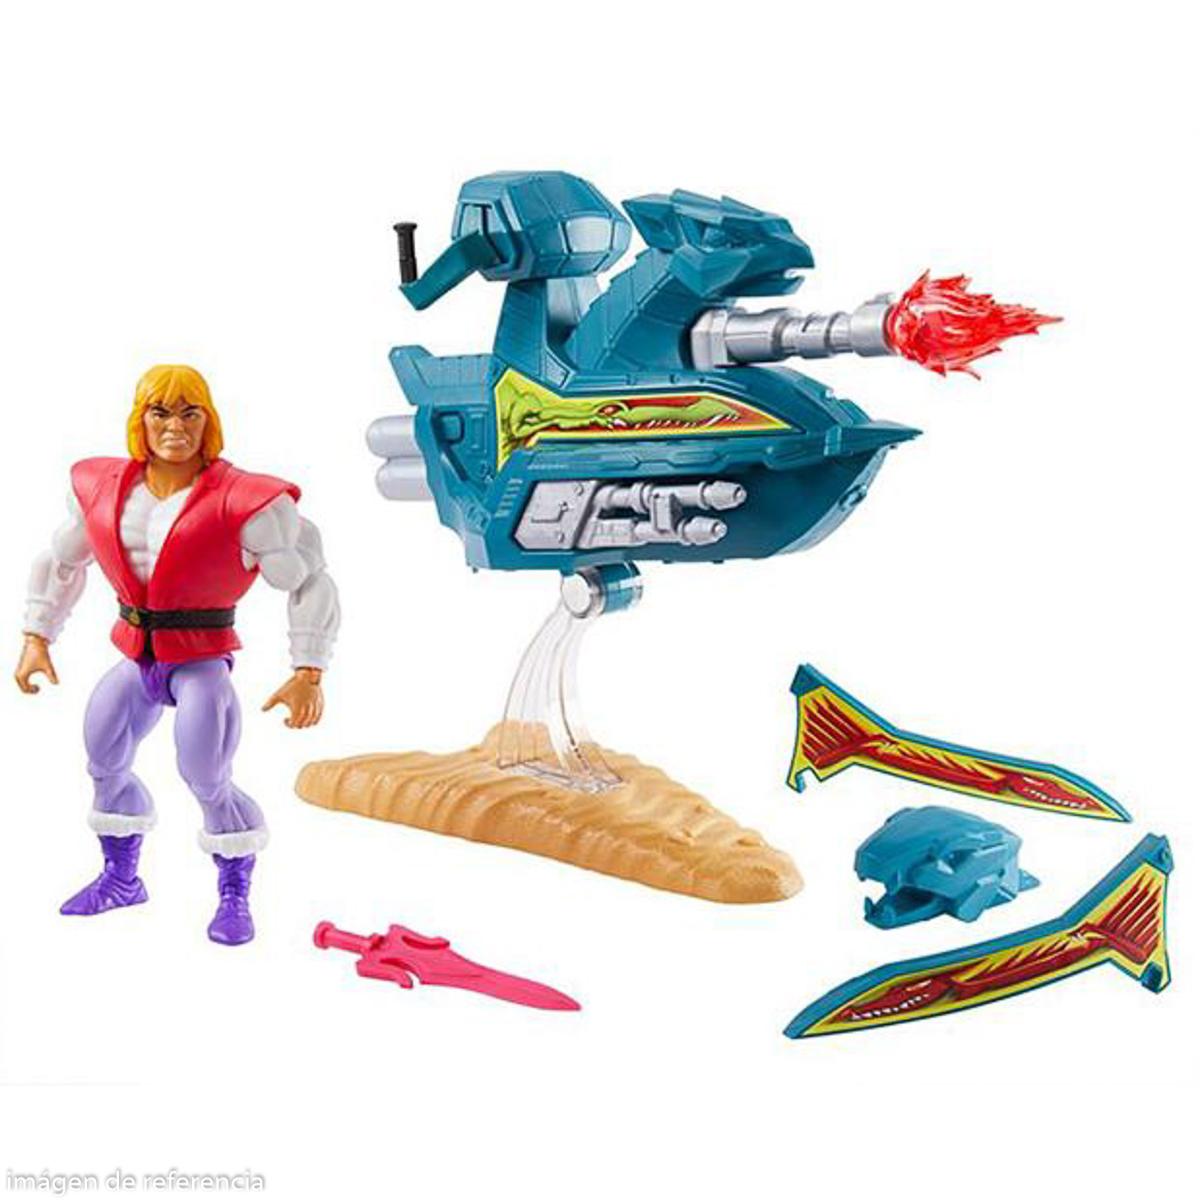 MASTERS OF THE UNIVERSE ORIGINS JET SLED